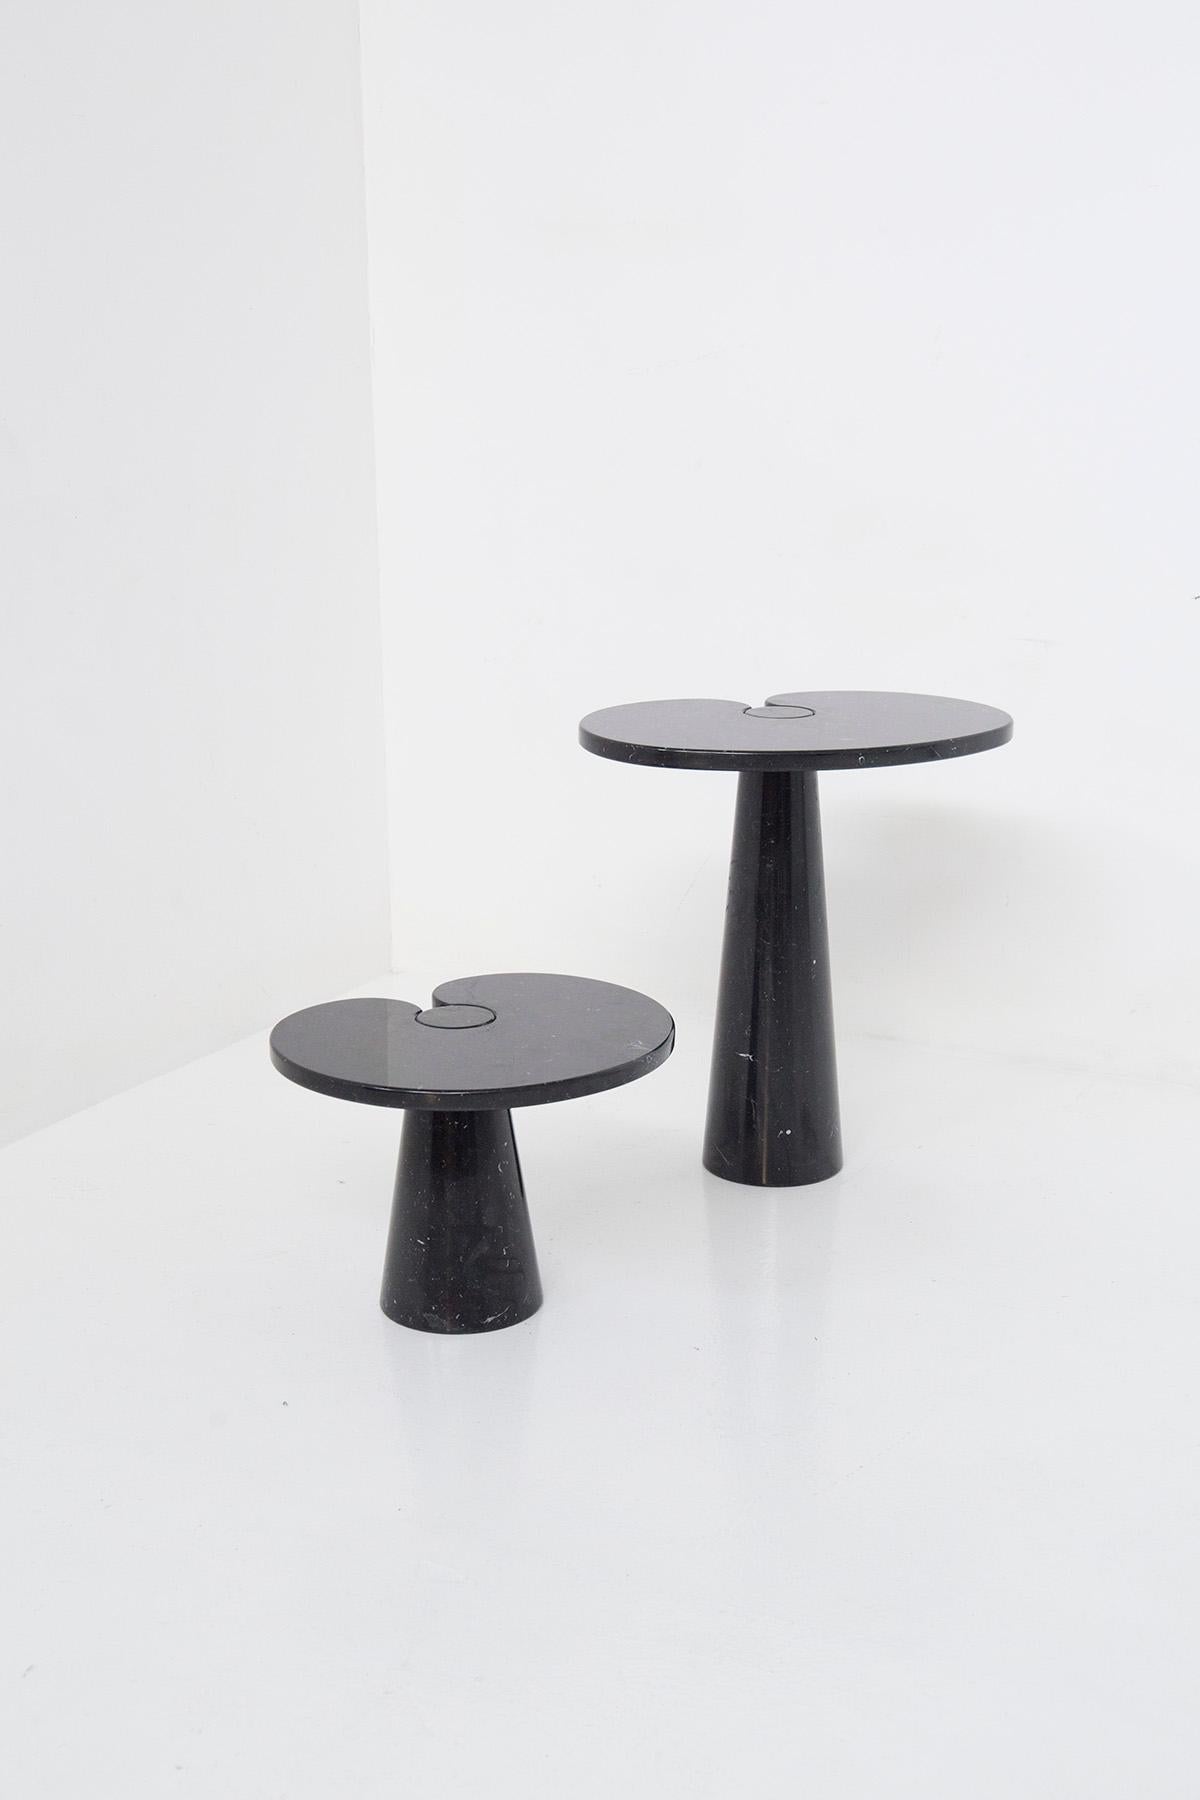 Splendid set composed of two small tables in black marquina marble designed by Angelo Mangiarotti, for the prestigious Skipper manufacture in the 70s.
This series called 